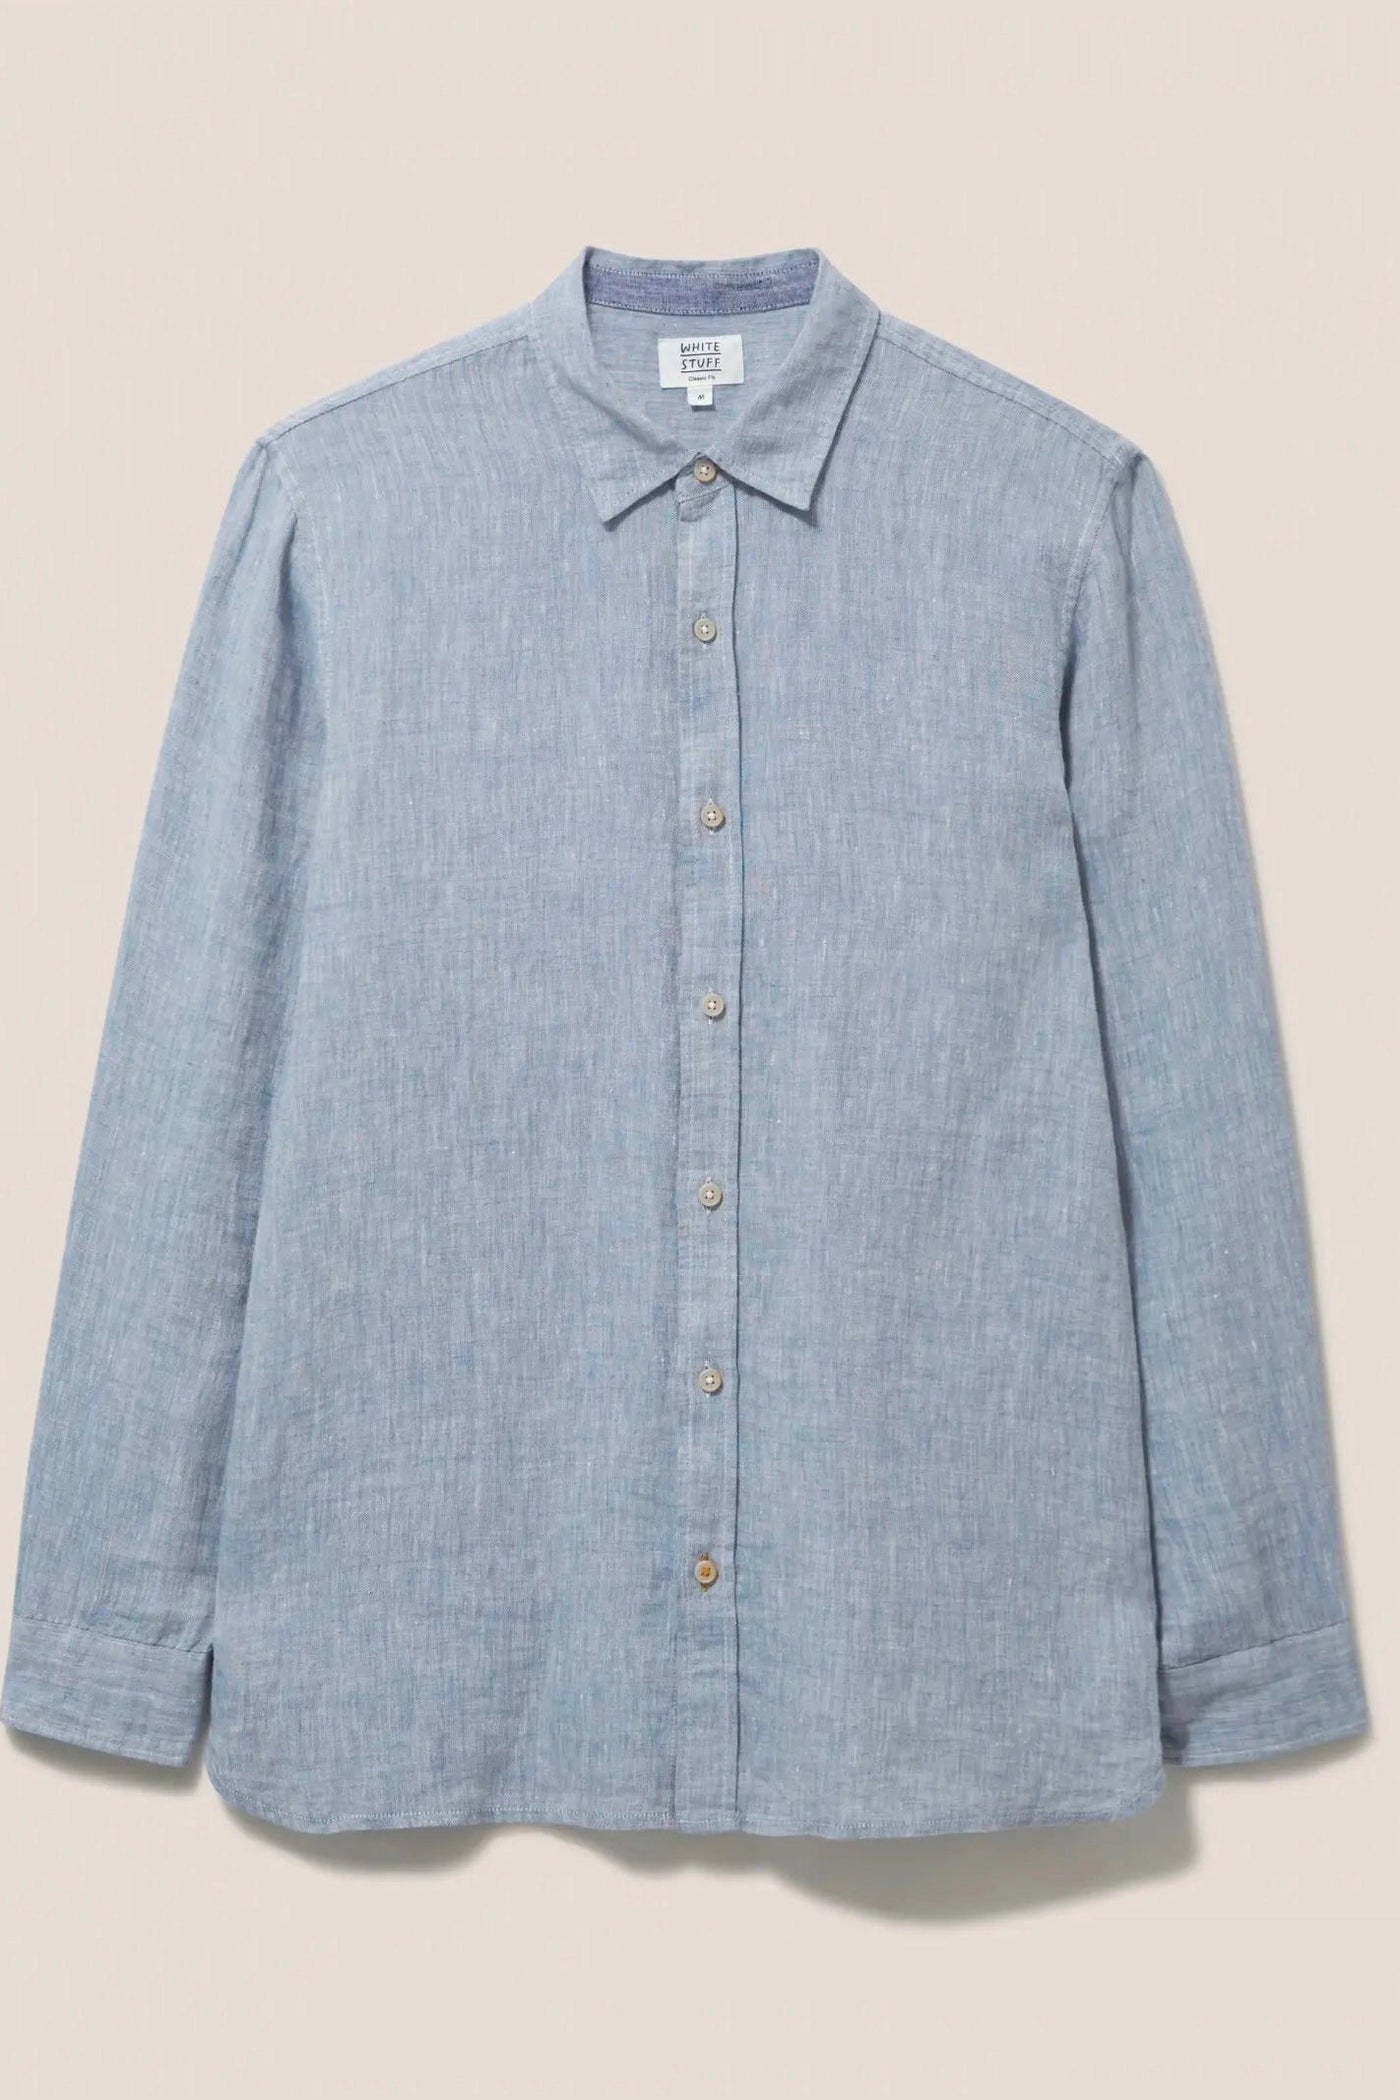 White Stuff Pembroke Long Sleeve Stripe Linen Shirt in Chamb Blue-Mens-Ohh! By Gum - Shop Sustainable